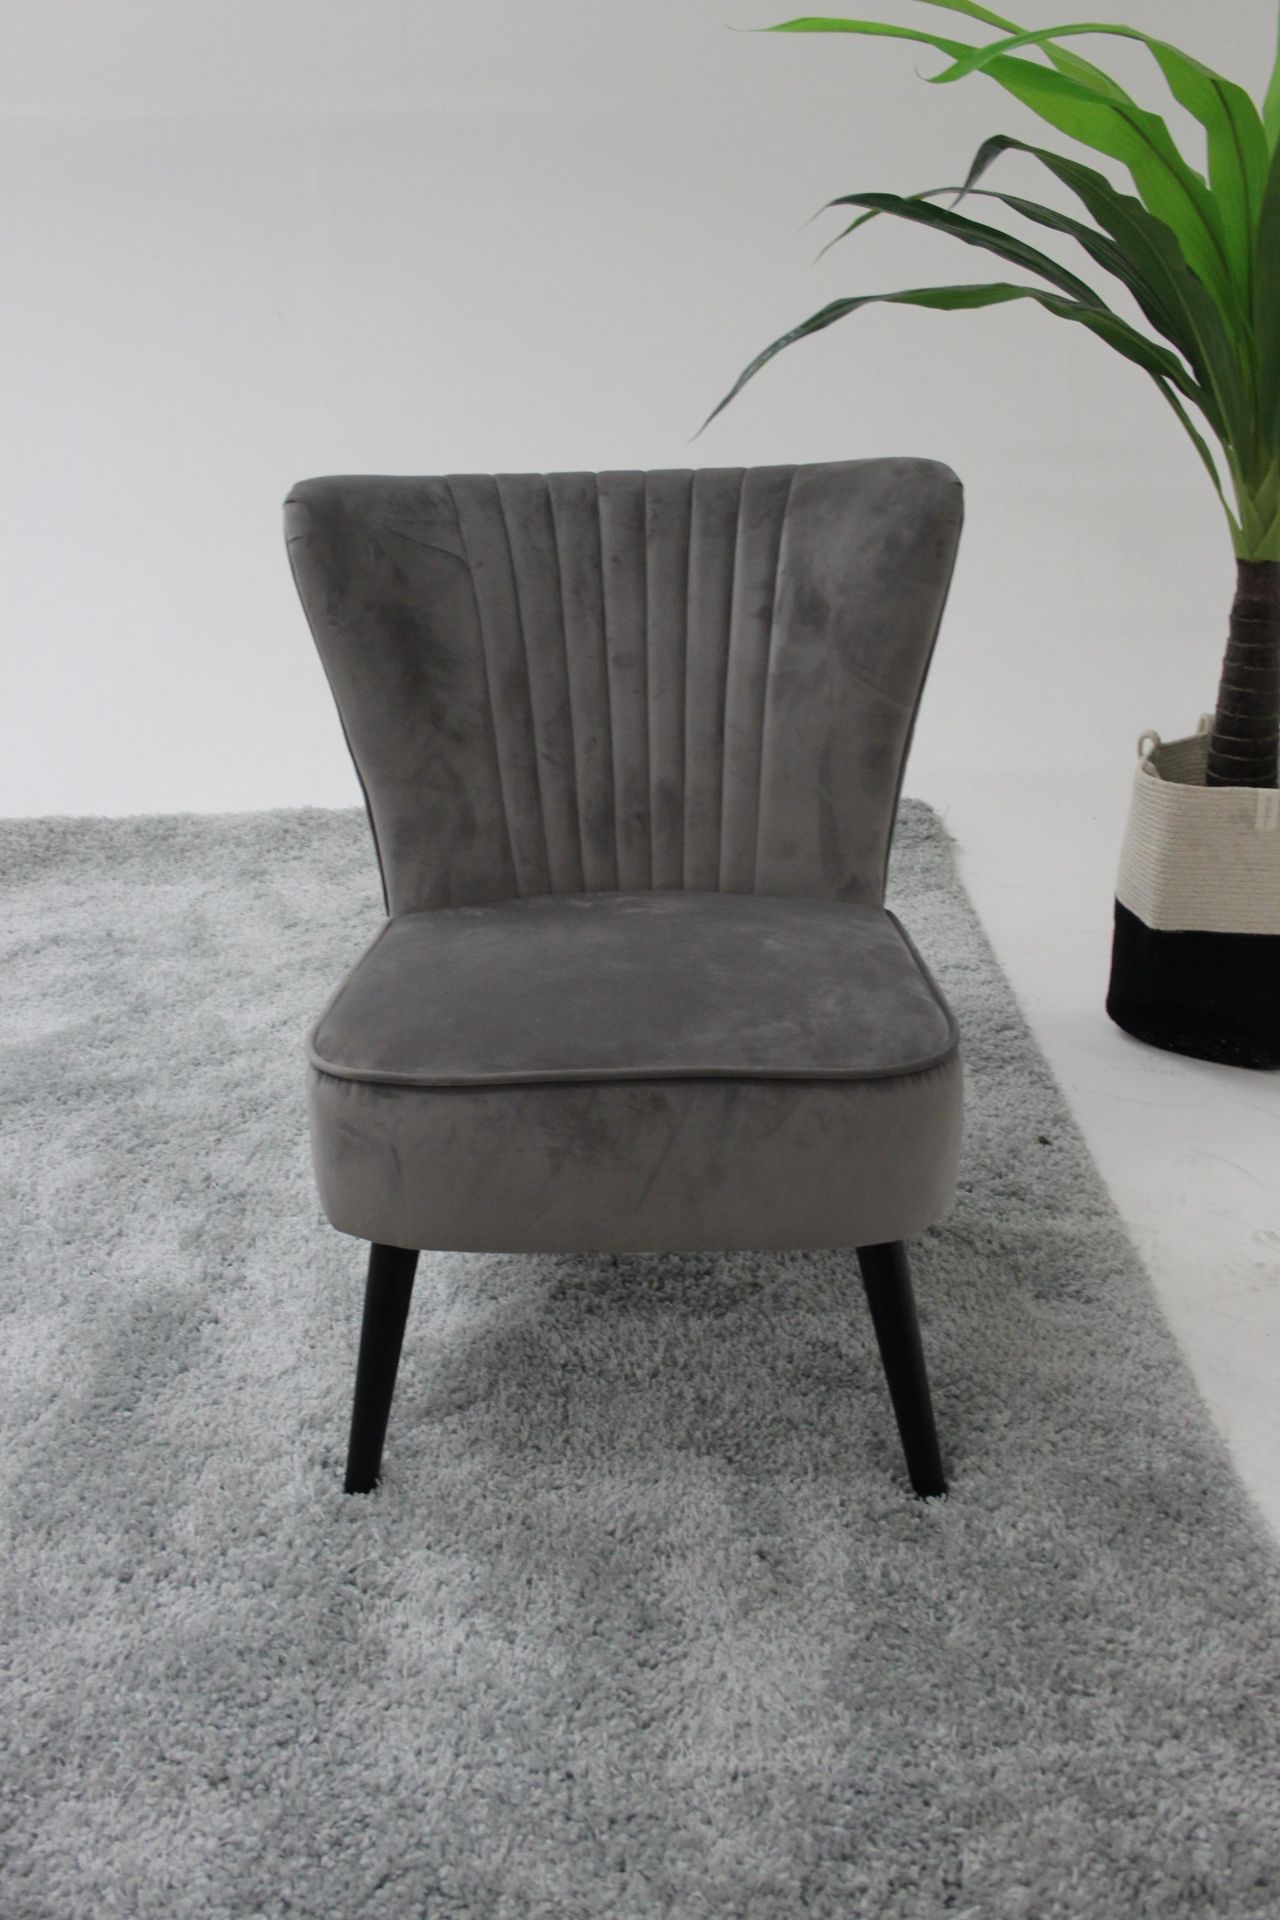 Mayfair Scallop Chair Blue Velvet Occasional Chair With Luxurious Velvet Upholstery Comfortable - Image 5 of 6